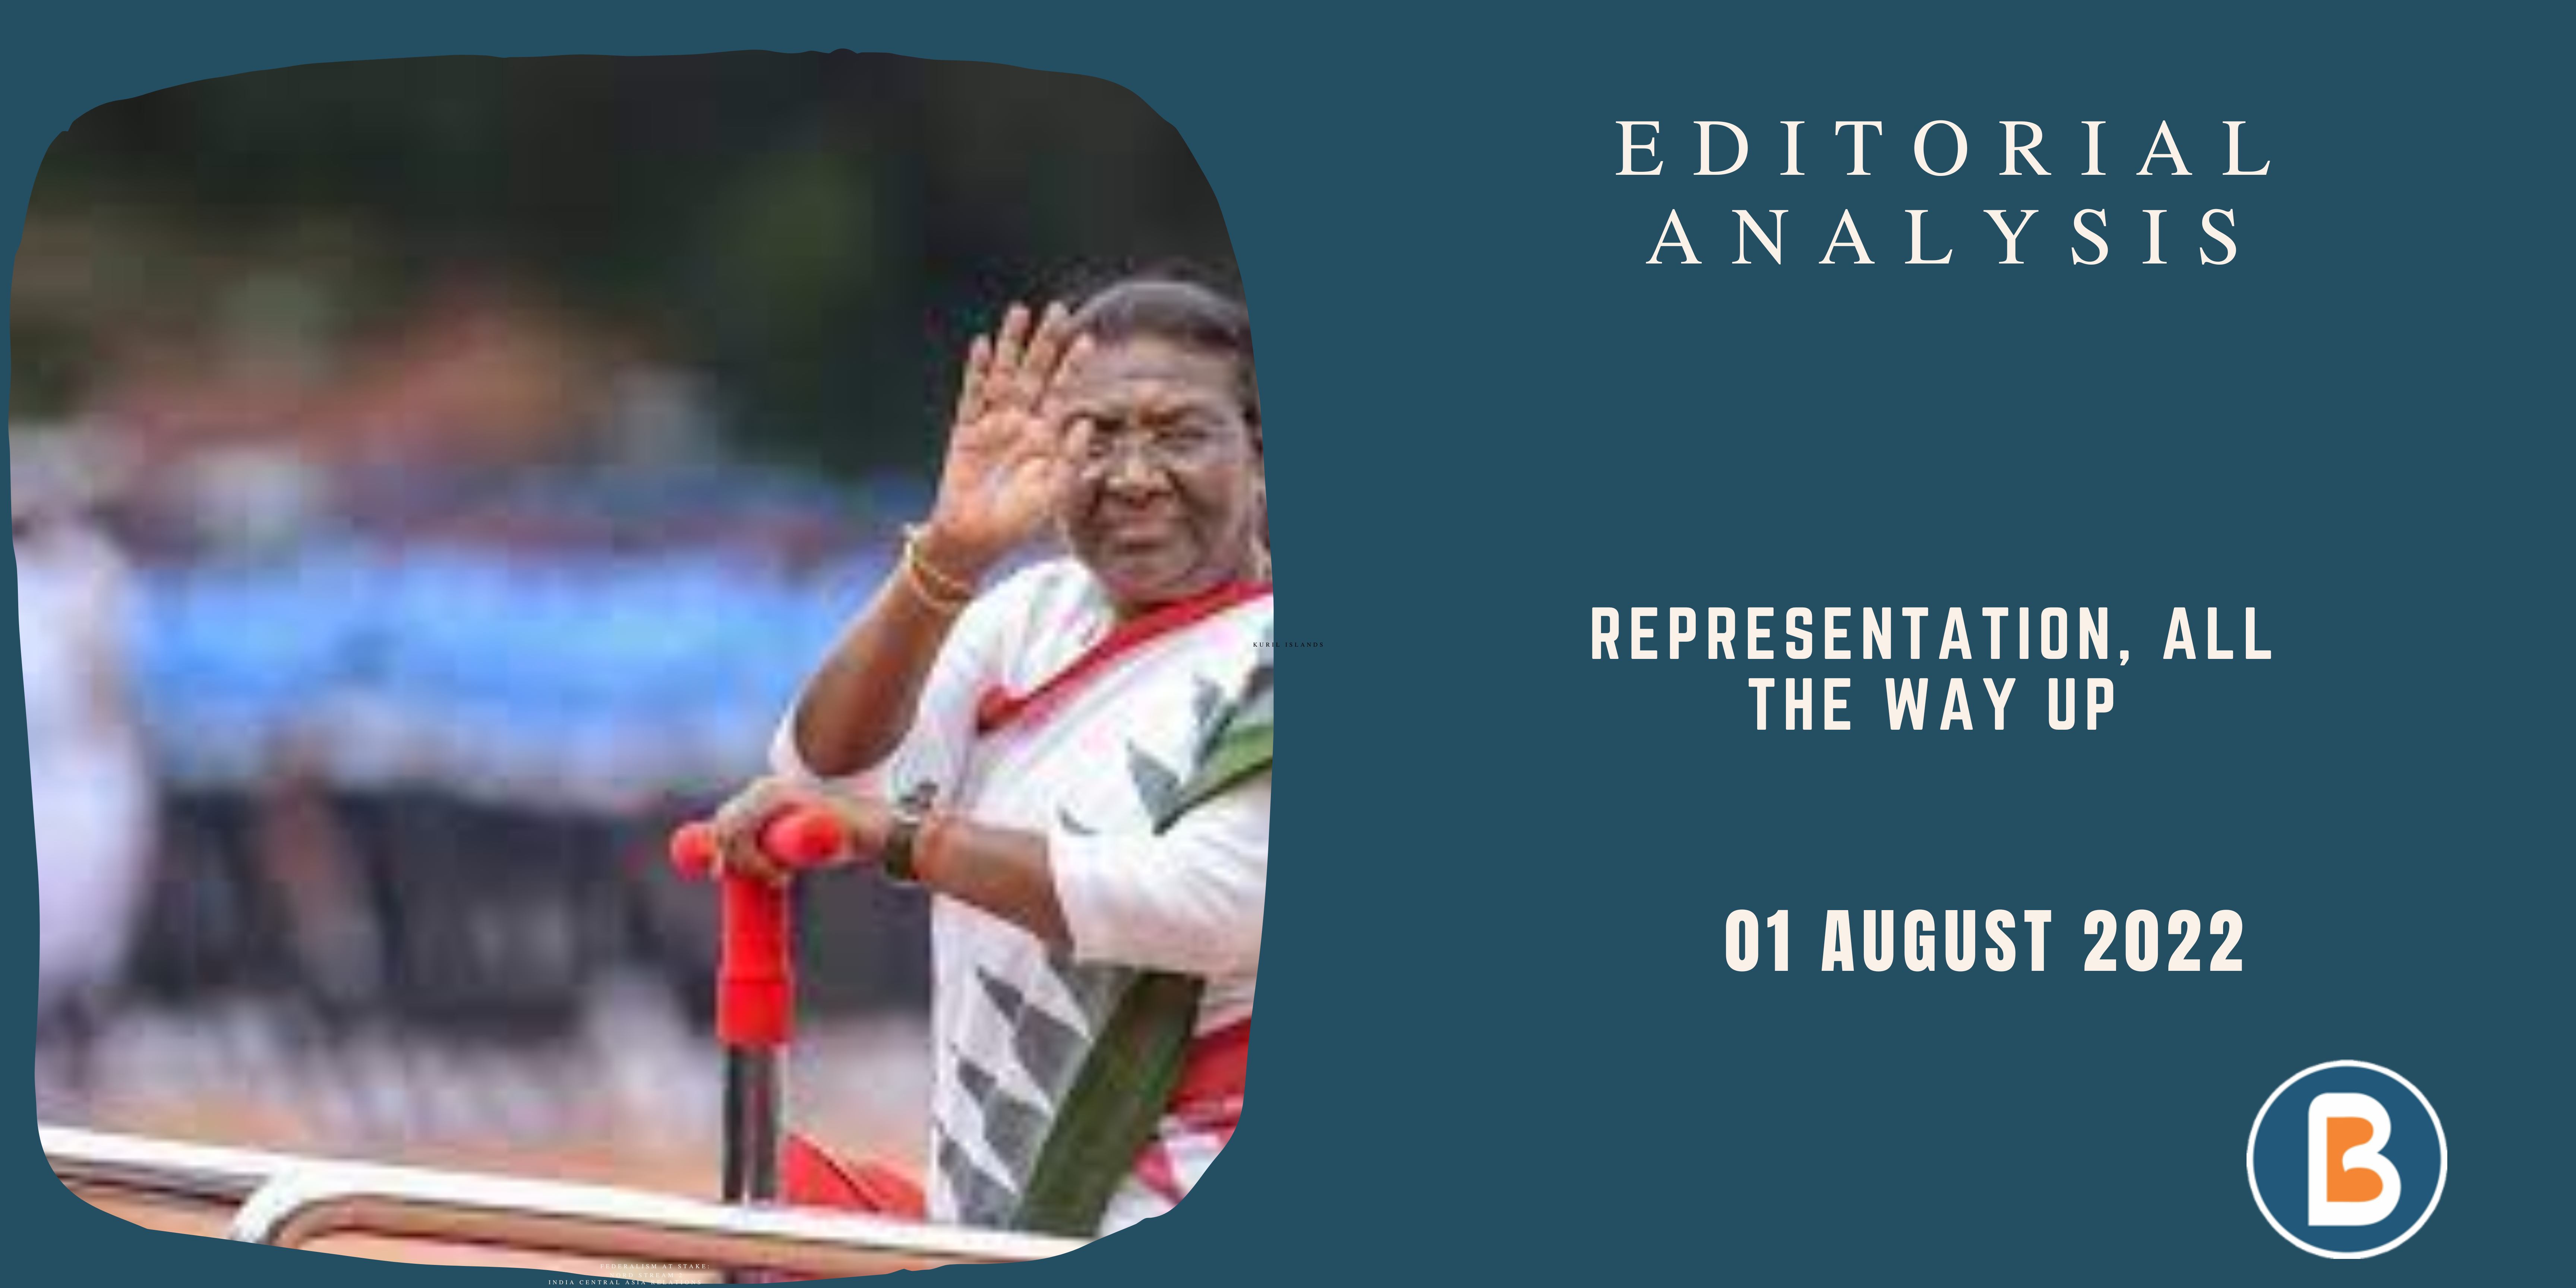 Editorial Analysis for IAS - Representation, All the Way Up